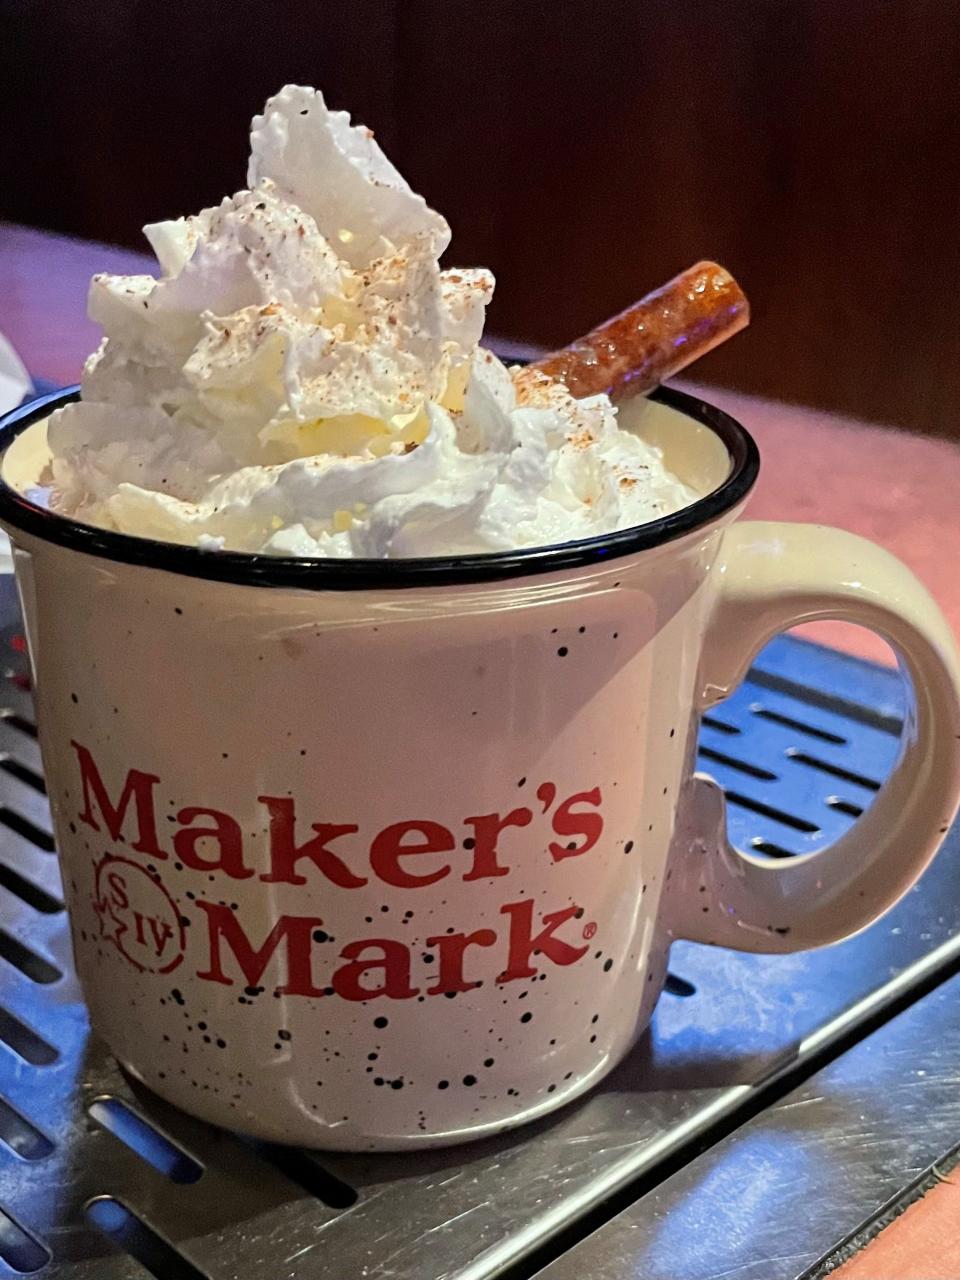 Try the Ziggy’s Gift, made with Maker’s Mark, hot chai and oat milk, from Millburn Standard.